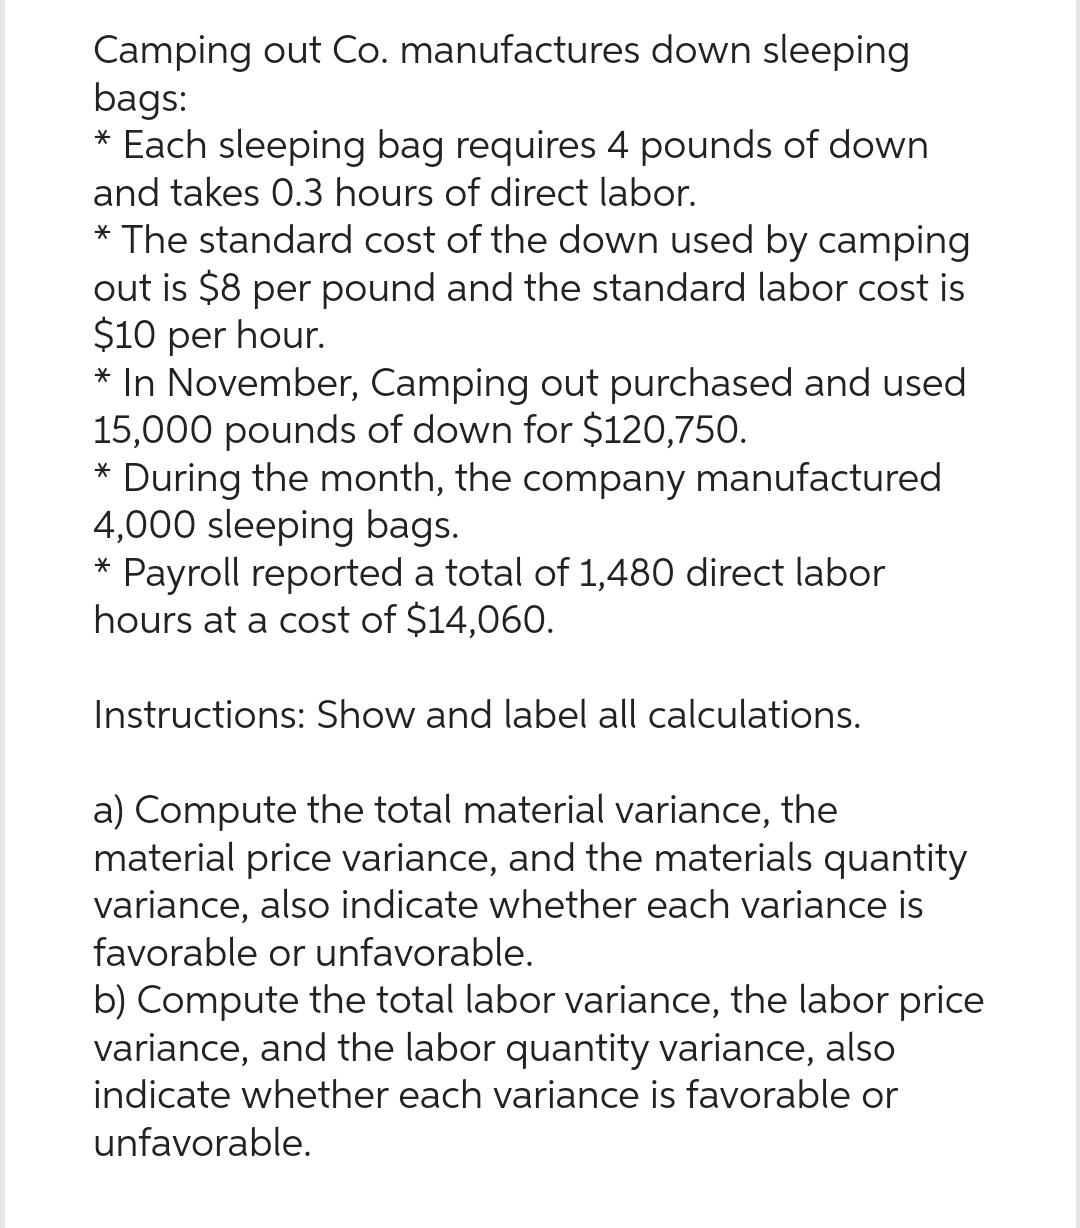 Camping out Co. manufactures down sleeping
bags:
* Each sleeping bag requires 4 pounds of down
and takes 0.3 hours of direct labor.
* The standard cost of the down used by camping
out is $8 per pound and the standard labor cost is
$10 per hour.
* In November, Camping out purchased and used
15,000 pounds of down for $120,750.
* During the month, the company manufactured
4,000 sleeping bags.
* Payroll reported a total of 1,480 direct labor
hours at a cost of $14,060.
Instructions: Show and label all calculations.
a) Compute the total material variance, the
material price variance, and the materials quantity
variance, also indicate whether each variance is
favorable or unfavorable.
b) Compute the total labor variance, the labor price
variance, and the labor quantity variance, also
indicate whether each variance is favorable or
unfavorable.